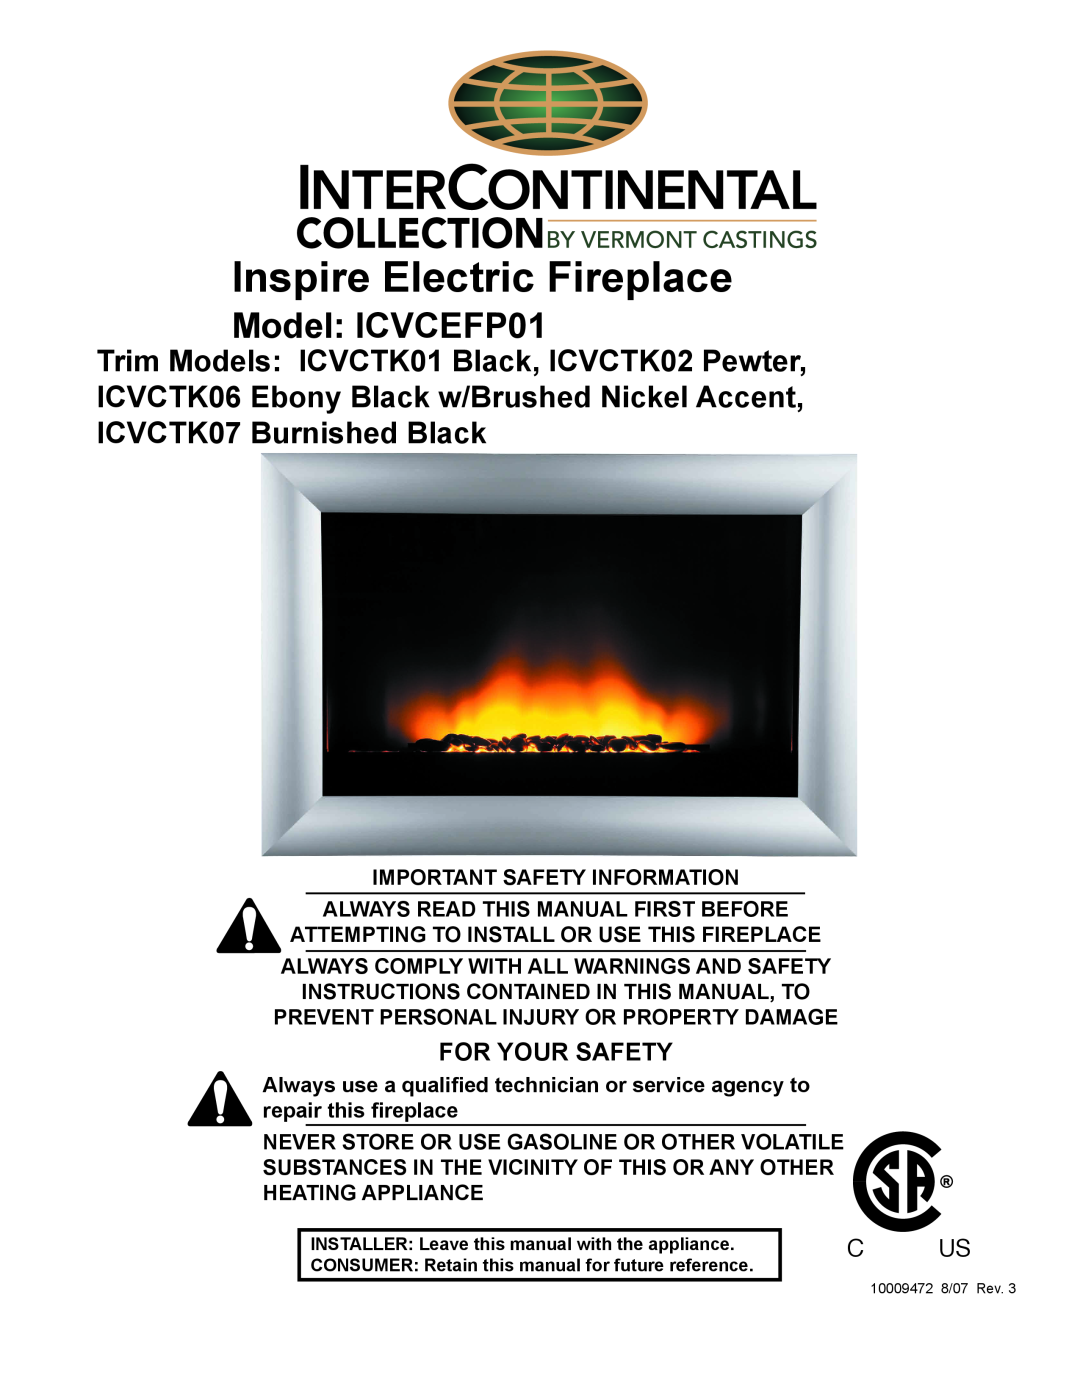 CFM Corporation manual Inspire Electric Fireplace, Model ICVCEFP01, For Your Safety 